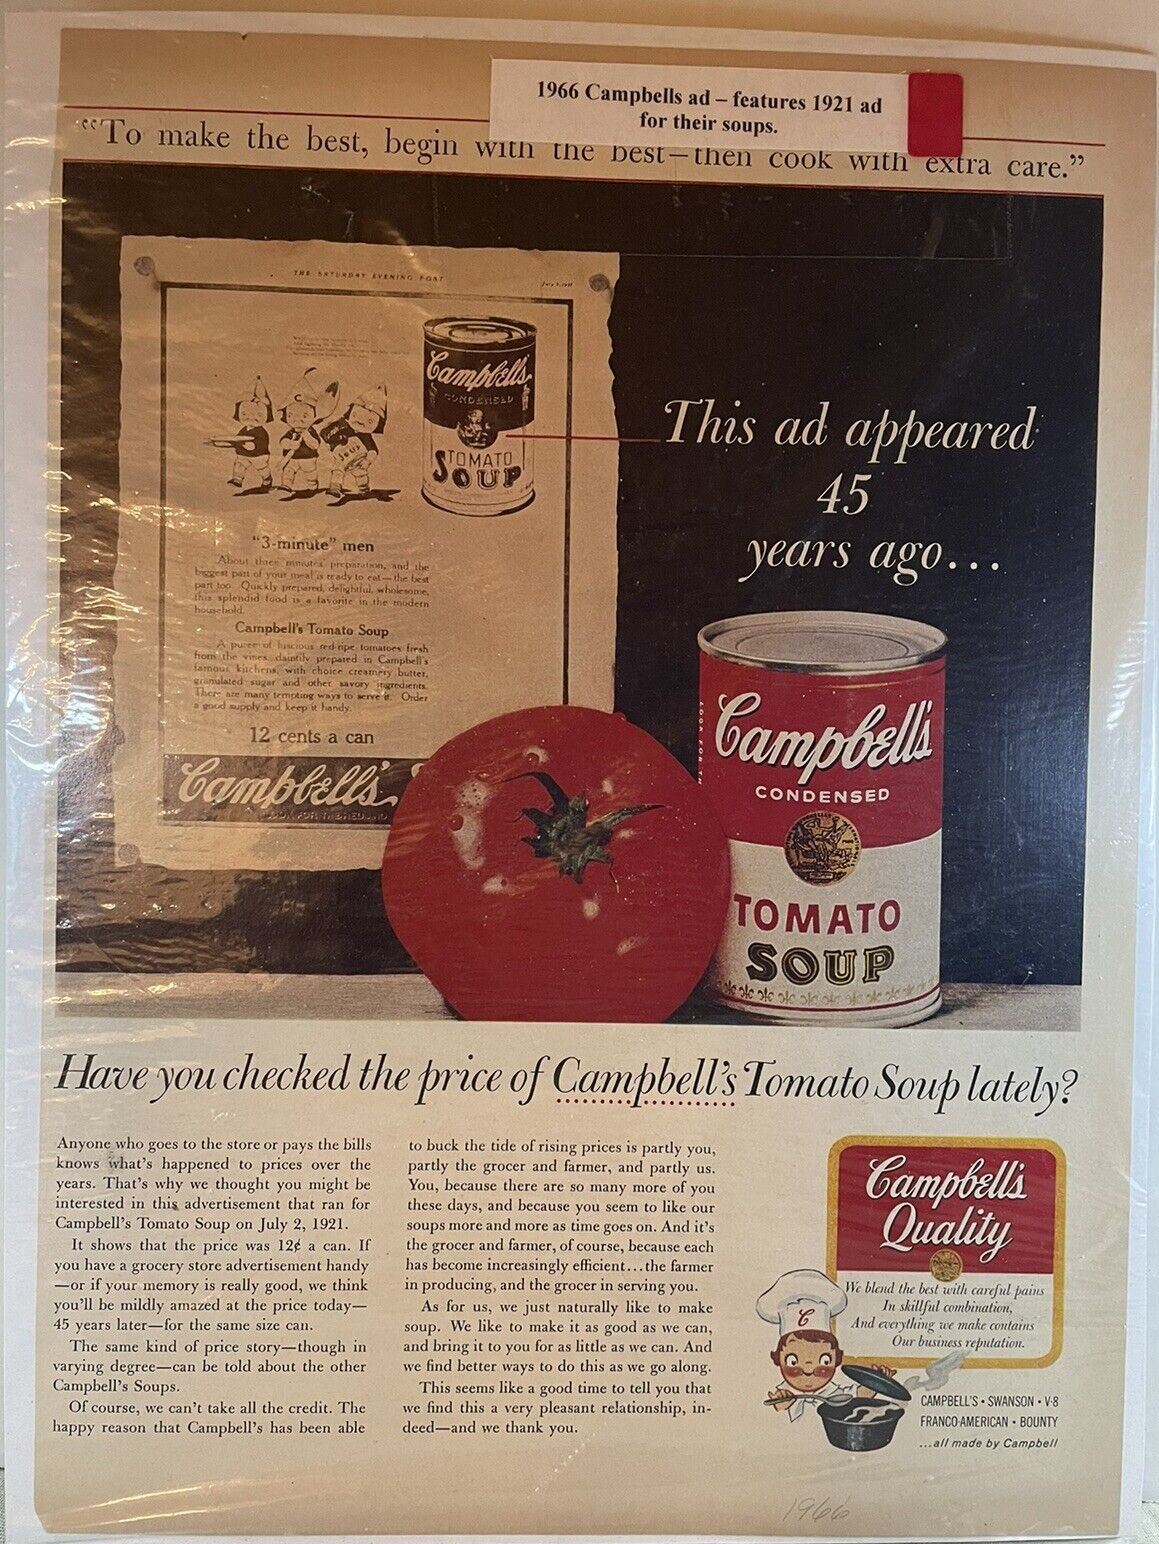 1966 Campbells Tomato Soup Print Ad Featuring Large Ad Franco American from 1921